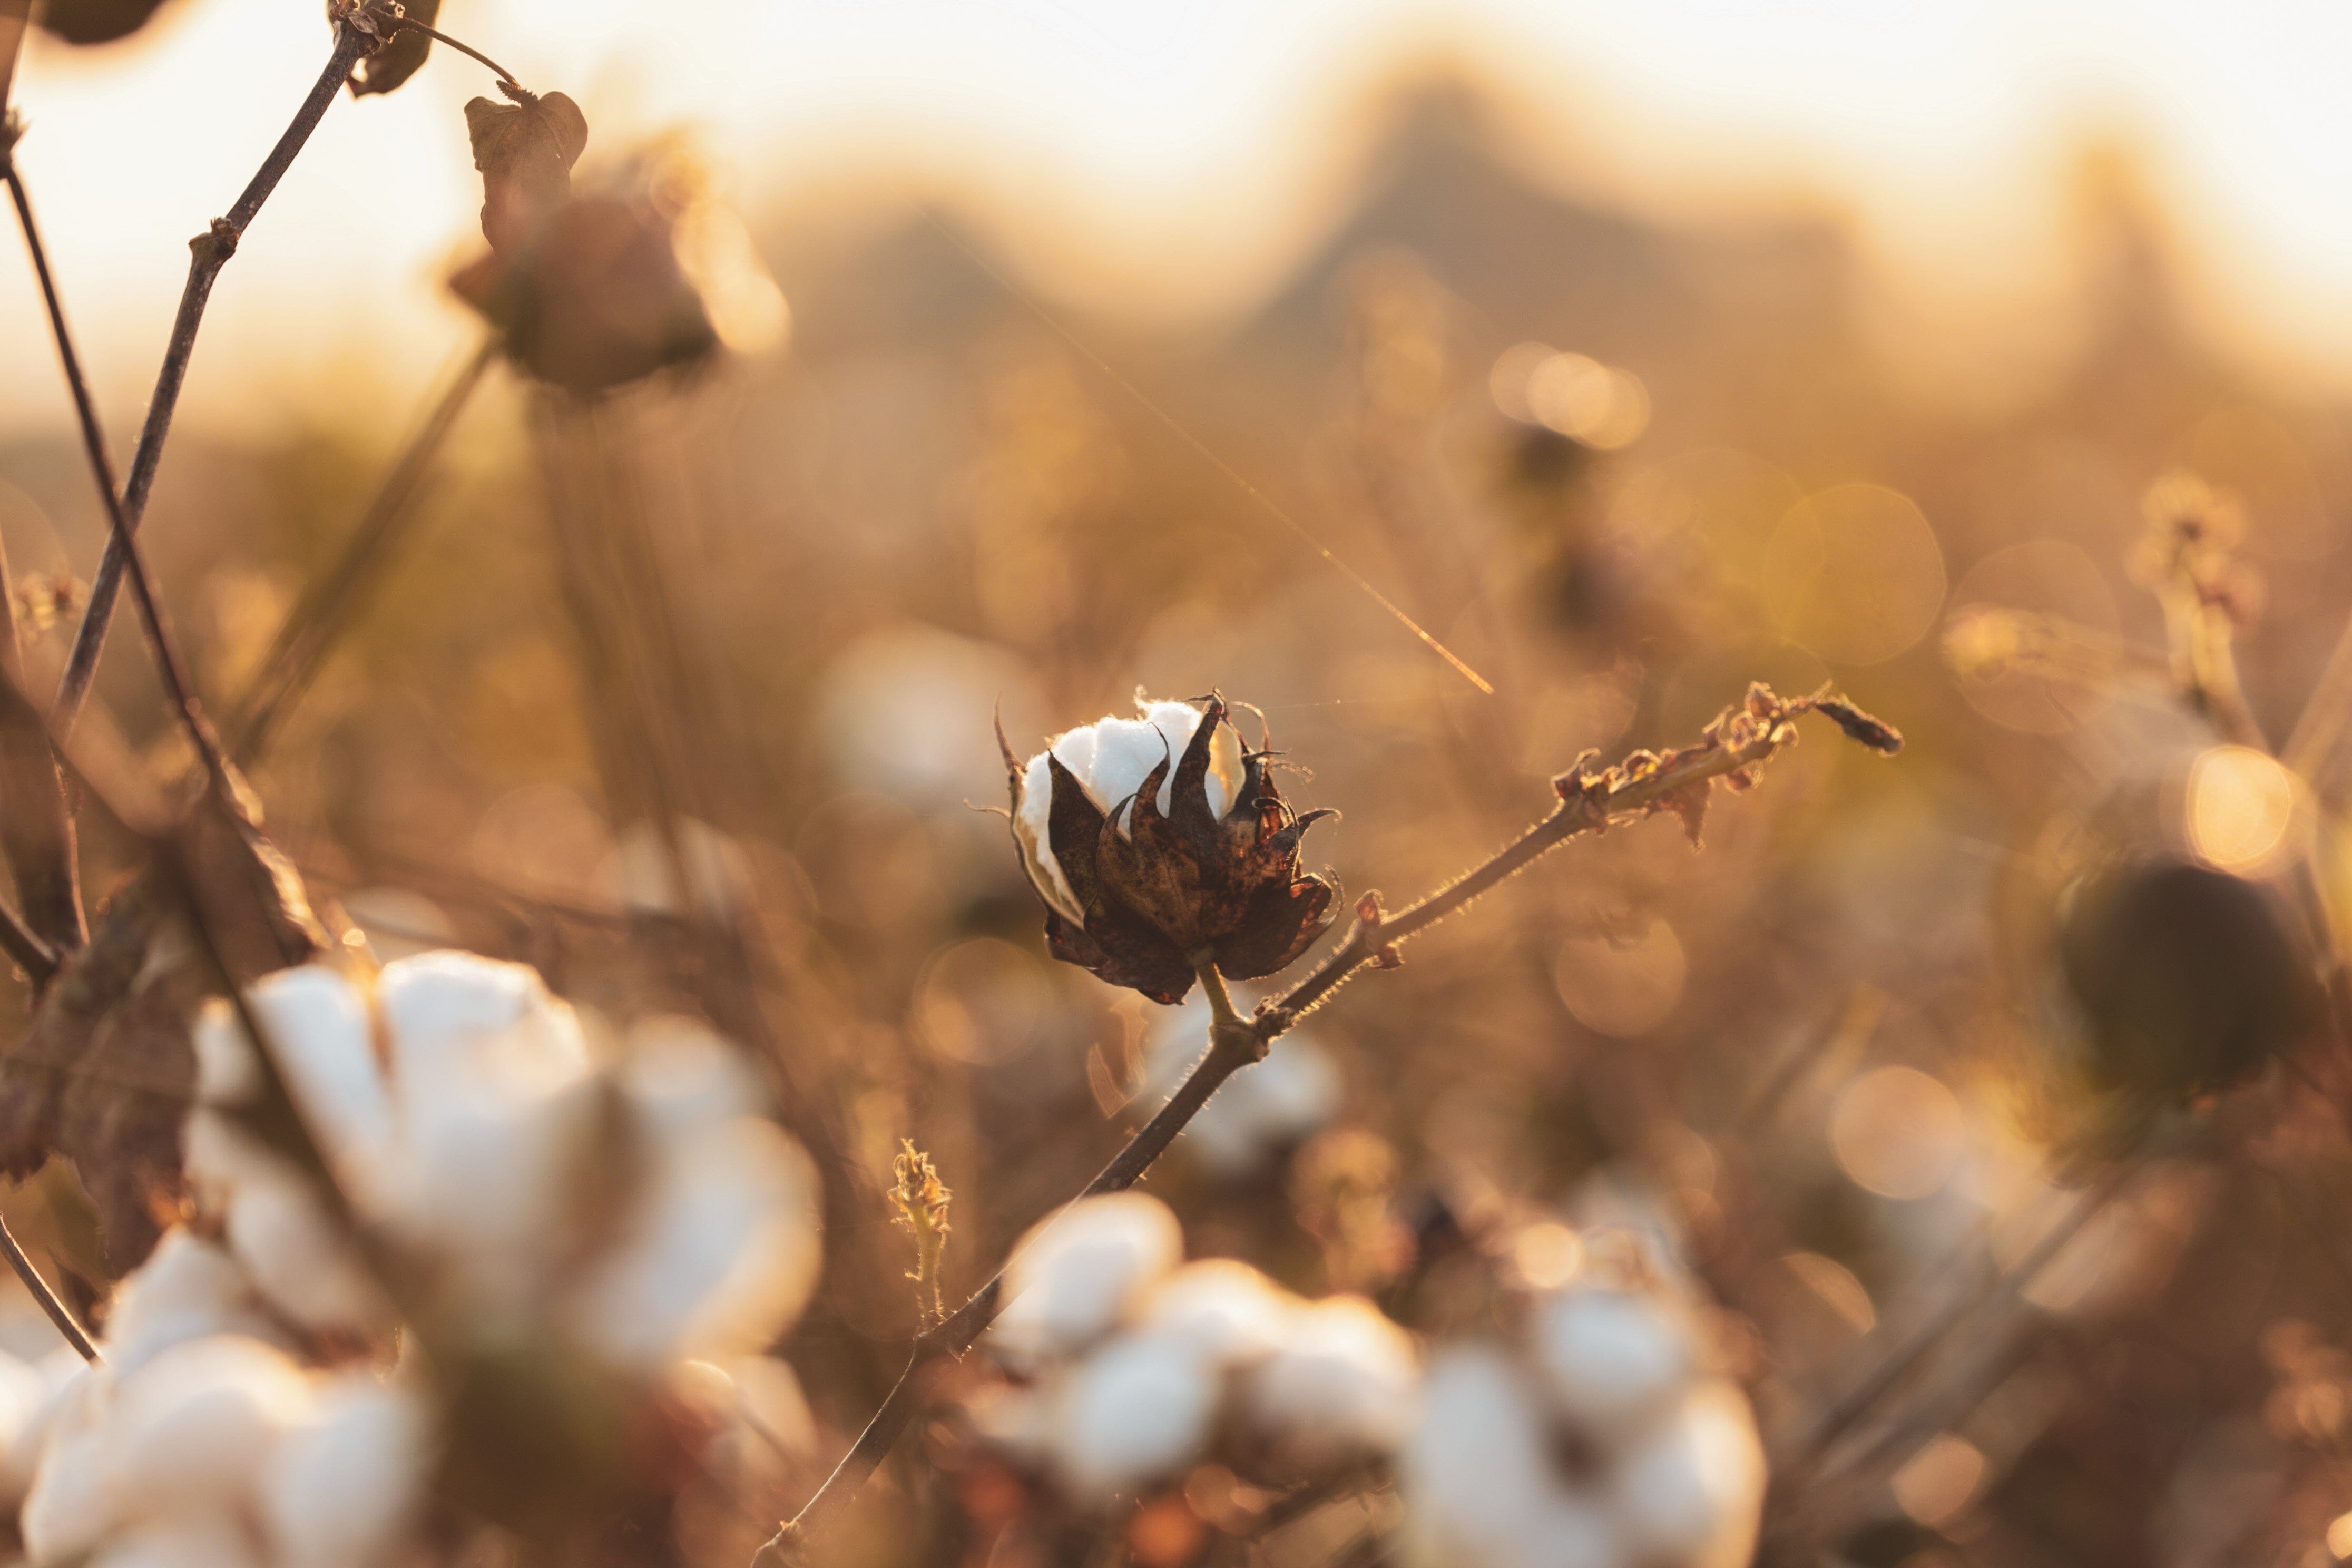 Organic cotton Vs Polyester- Why it matters?